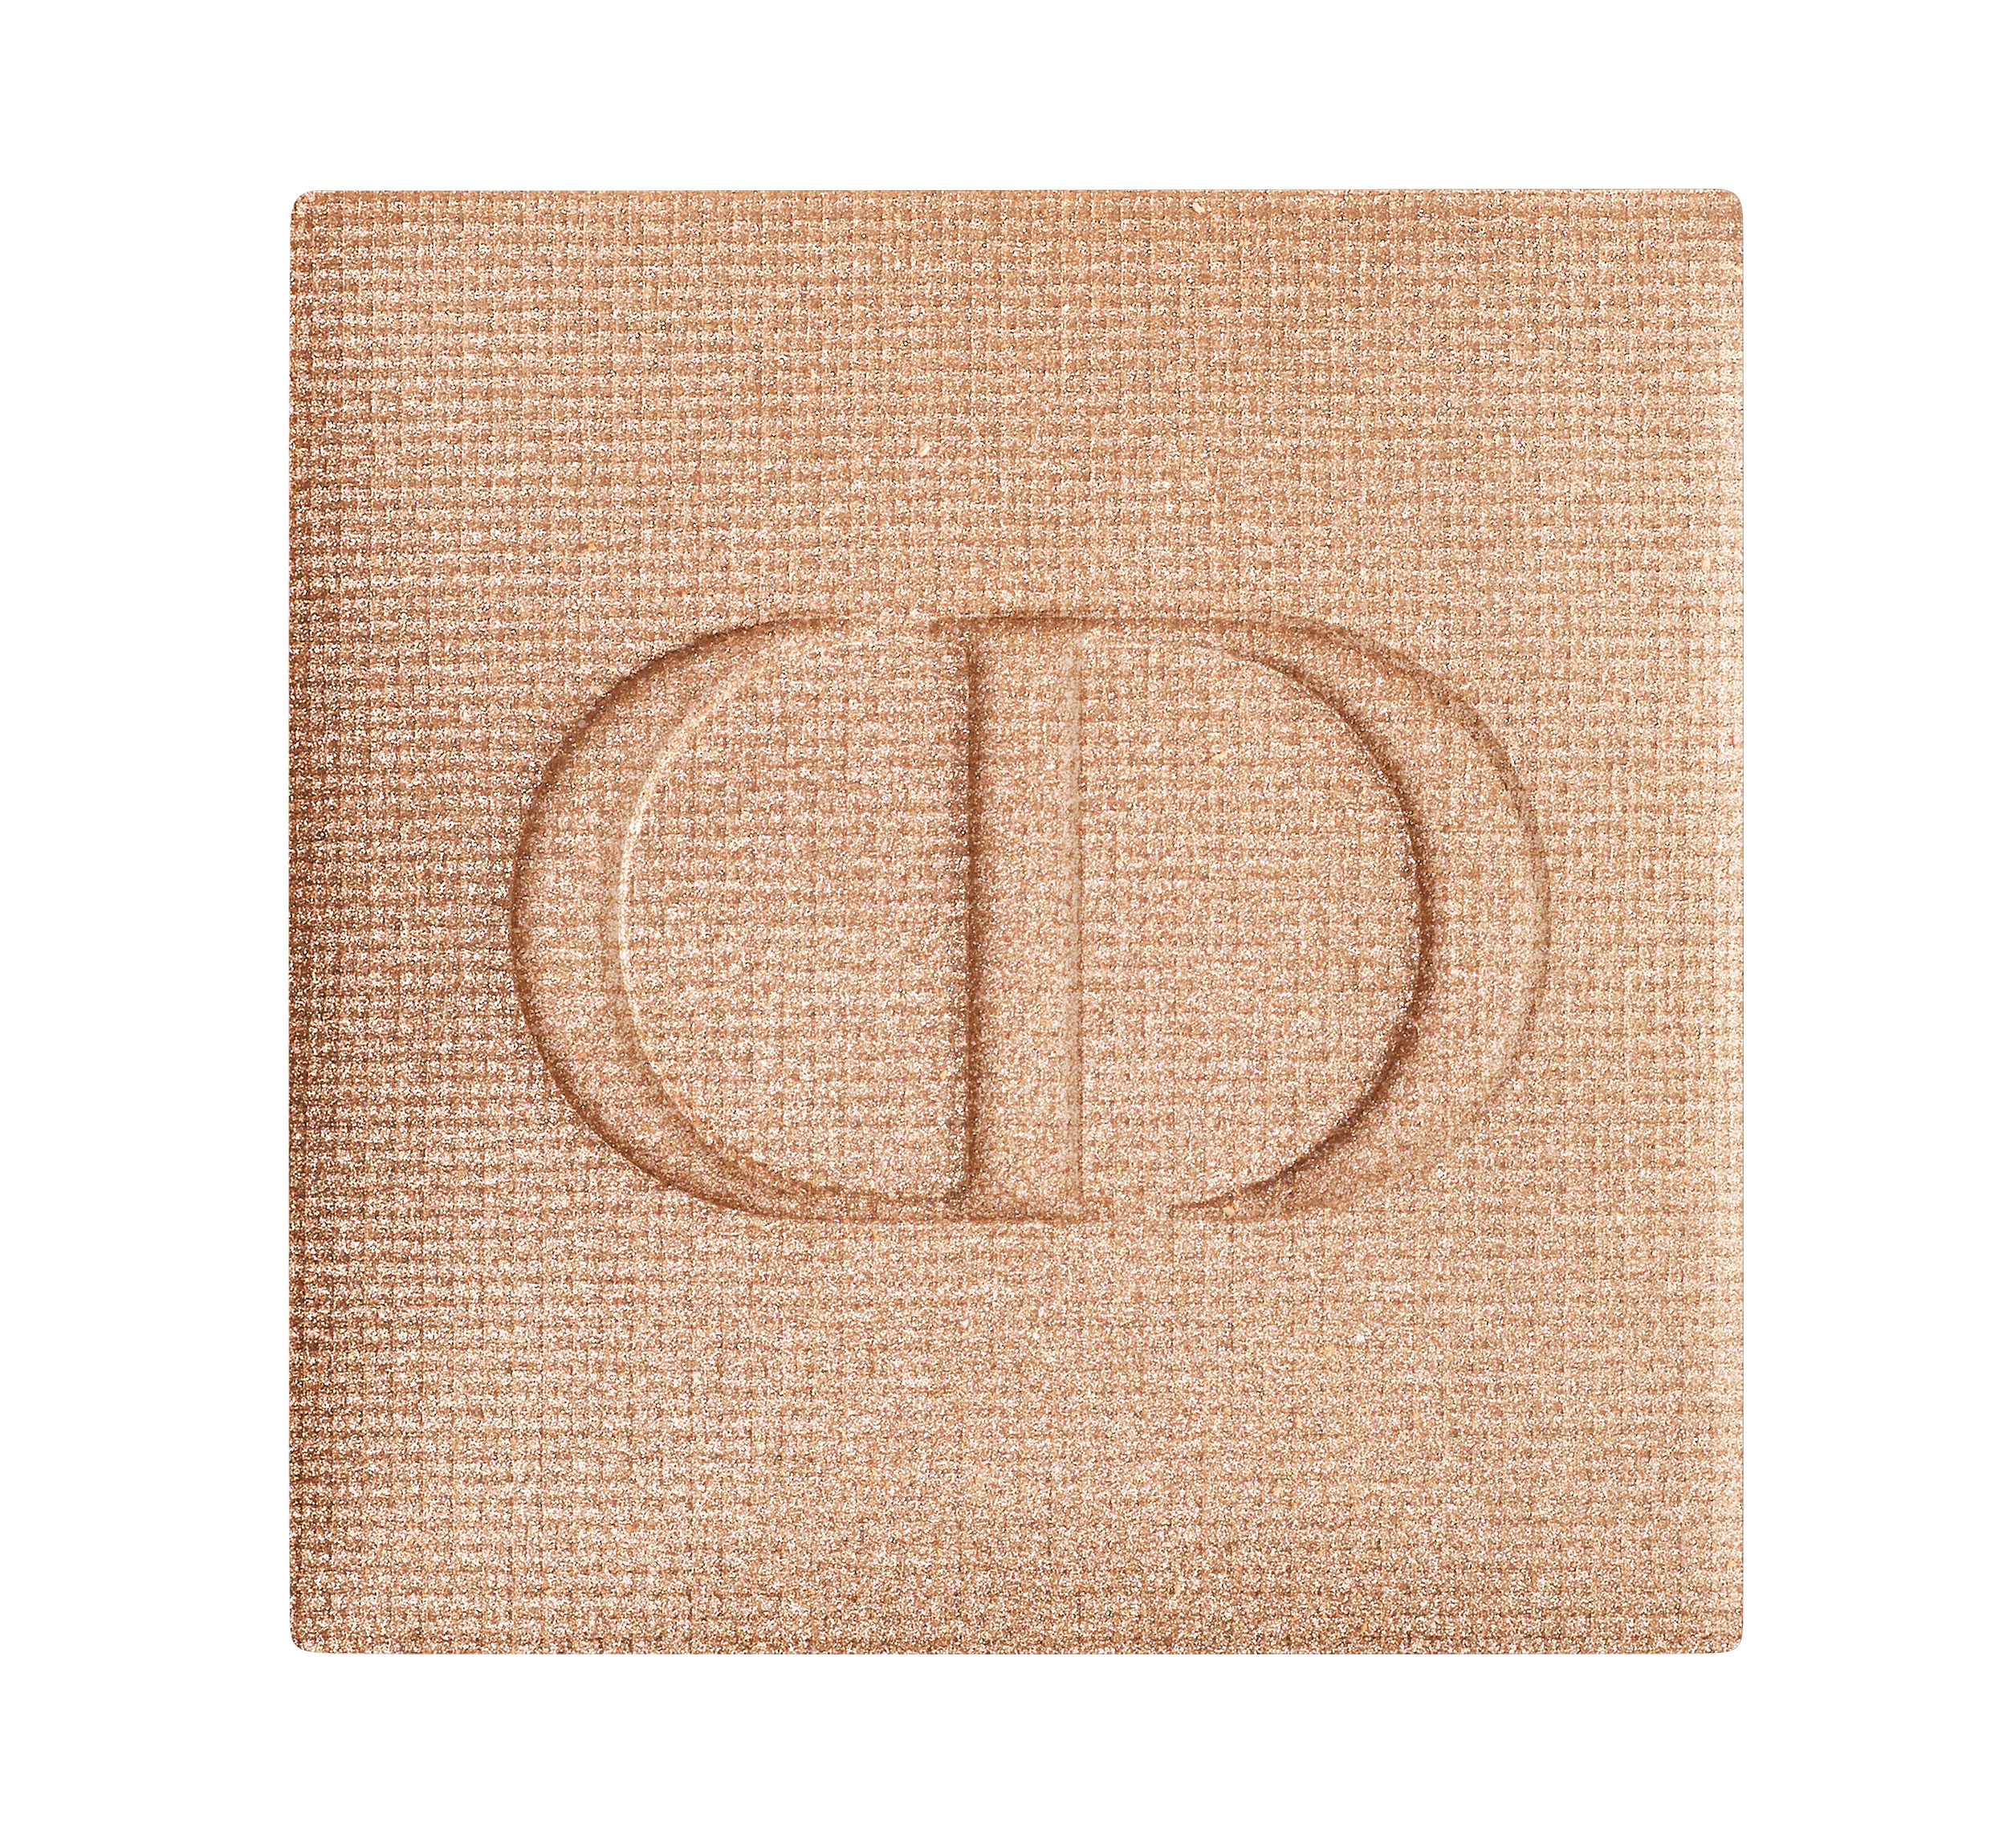 DIOR Mono Couleur Couture Eyeshadow, 530 Tulle